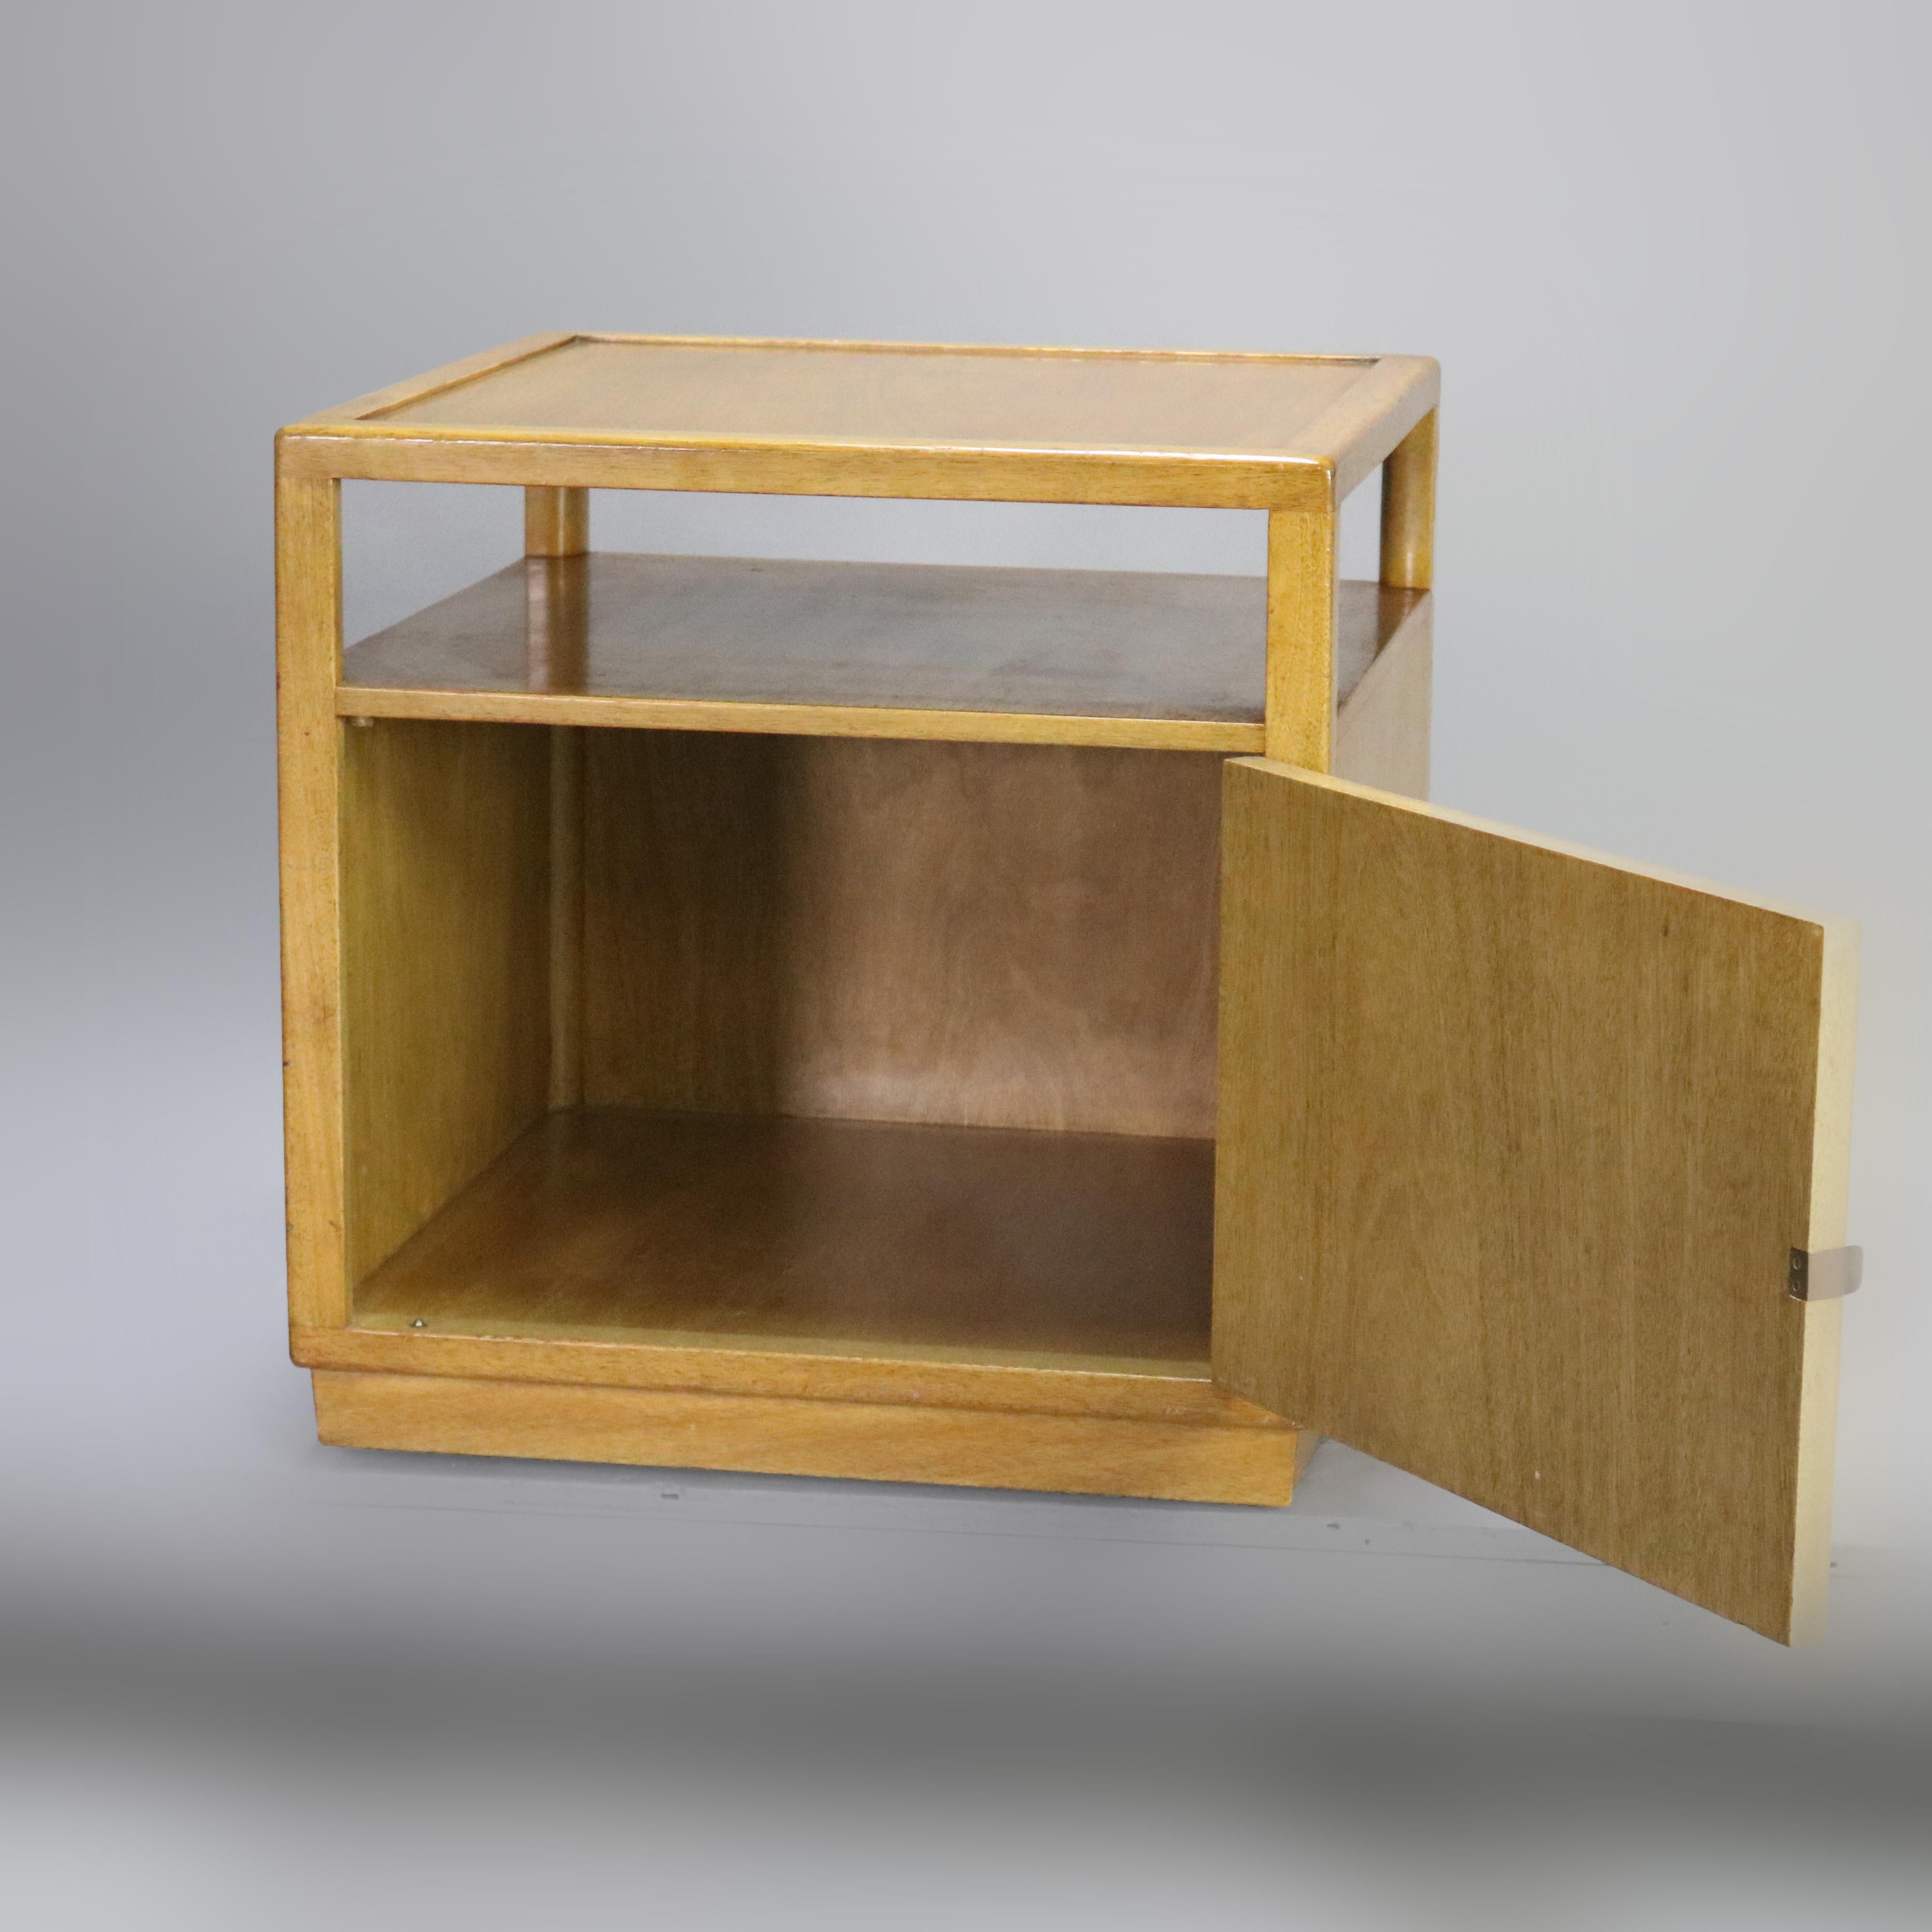 A Mid-Century Modern side stand by Dunbar offers bleached mahogany construction with elevated top surmounting lower cabinet, 20th century

***DELIVERY NOTICE – Due to COVID-19 we are employing NO-CONTACT PRACTICES in the transfer of purchased items.